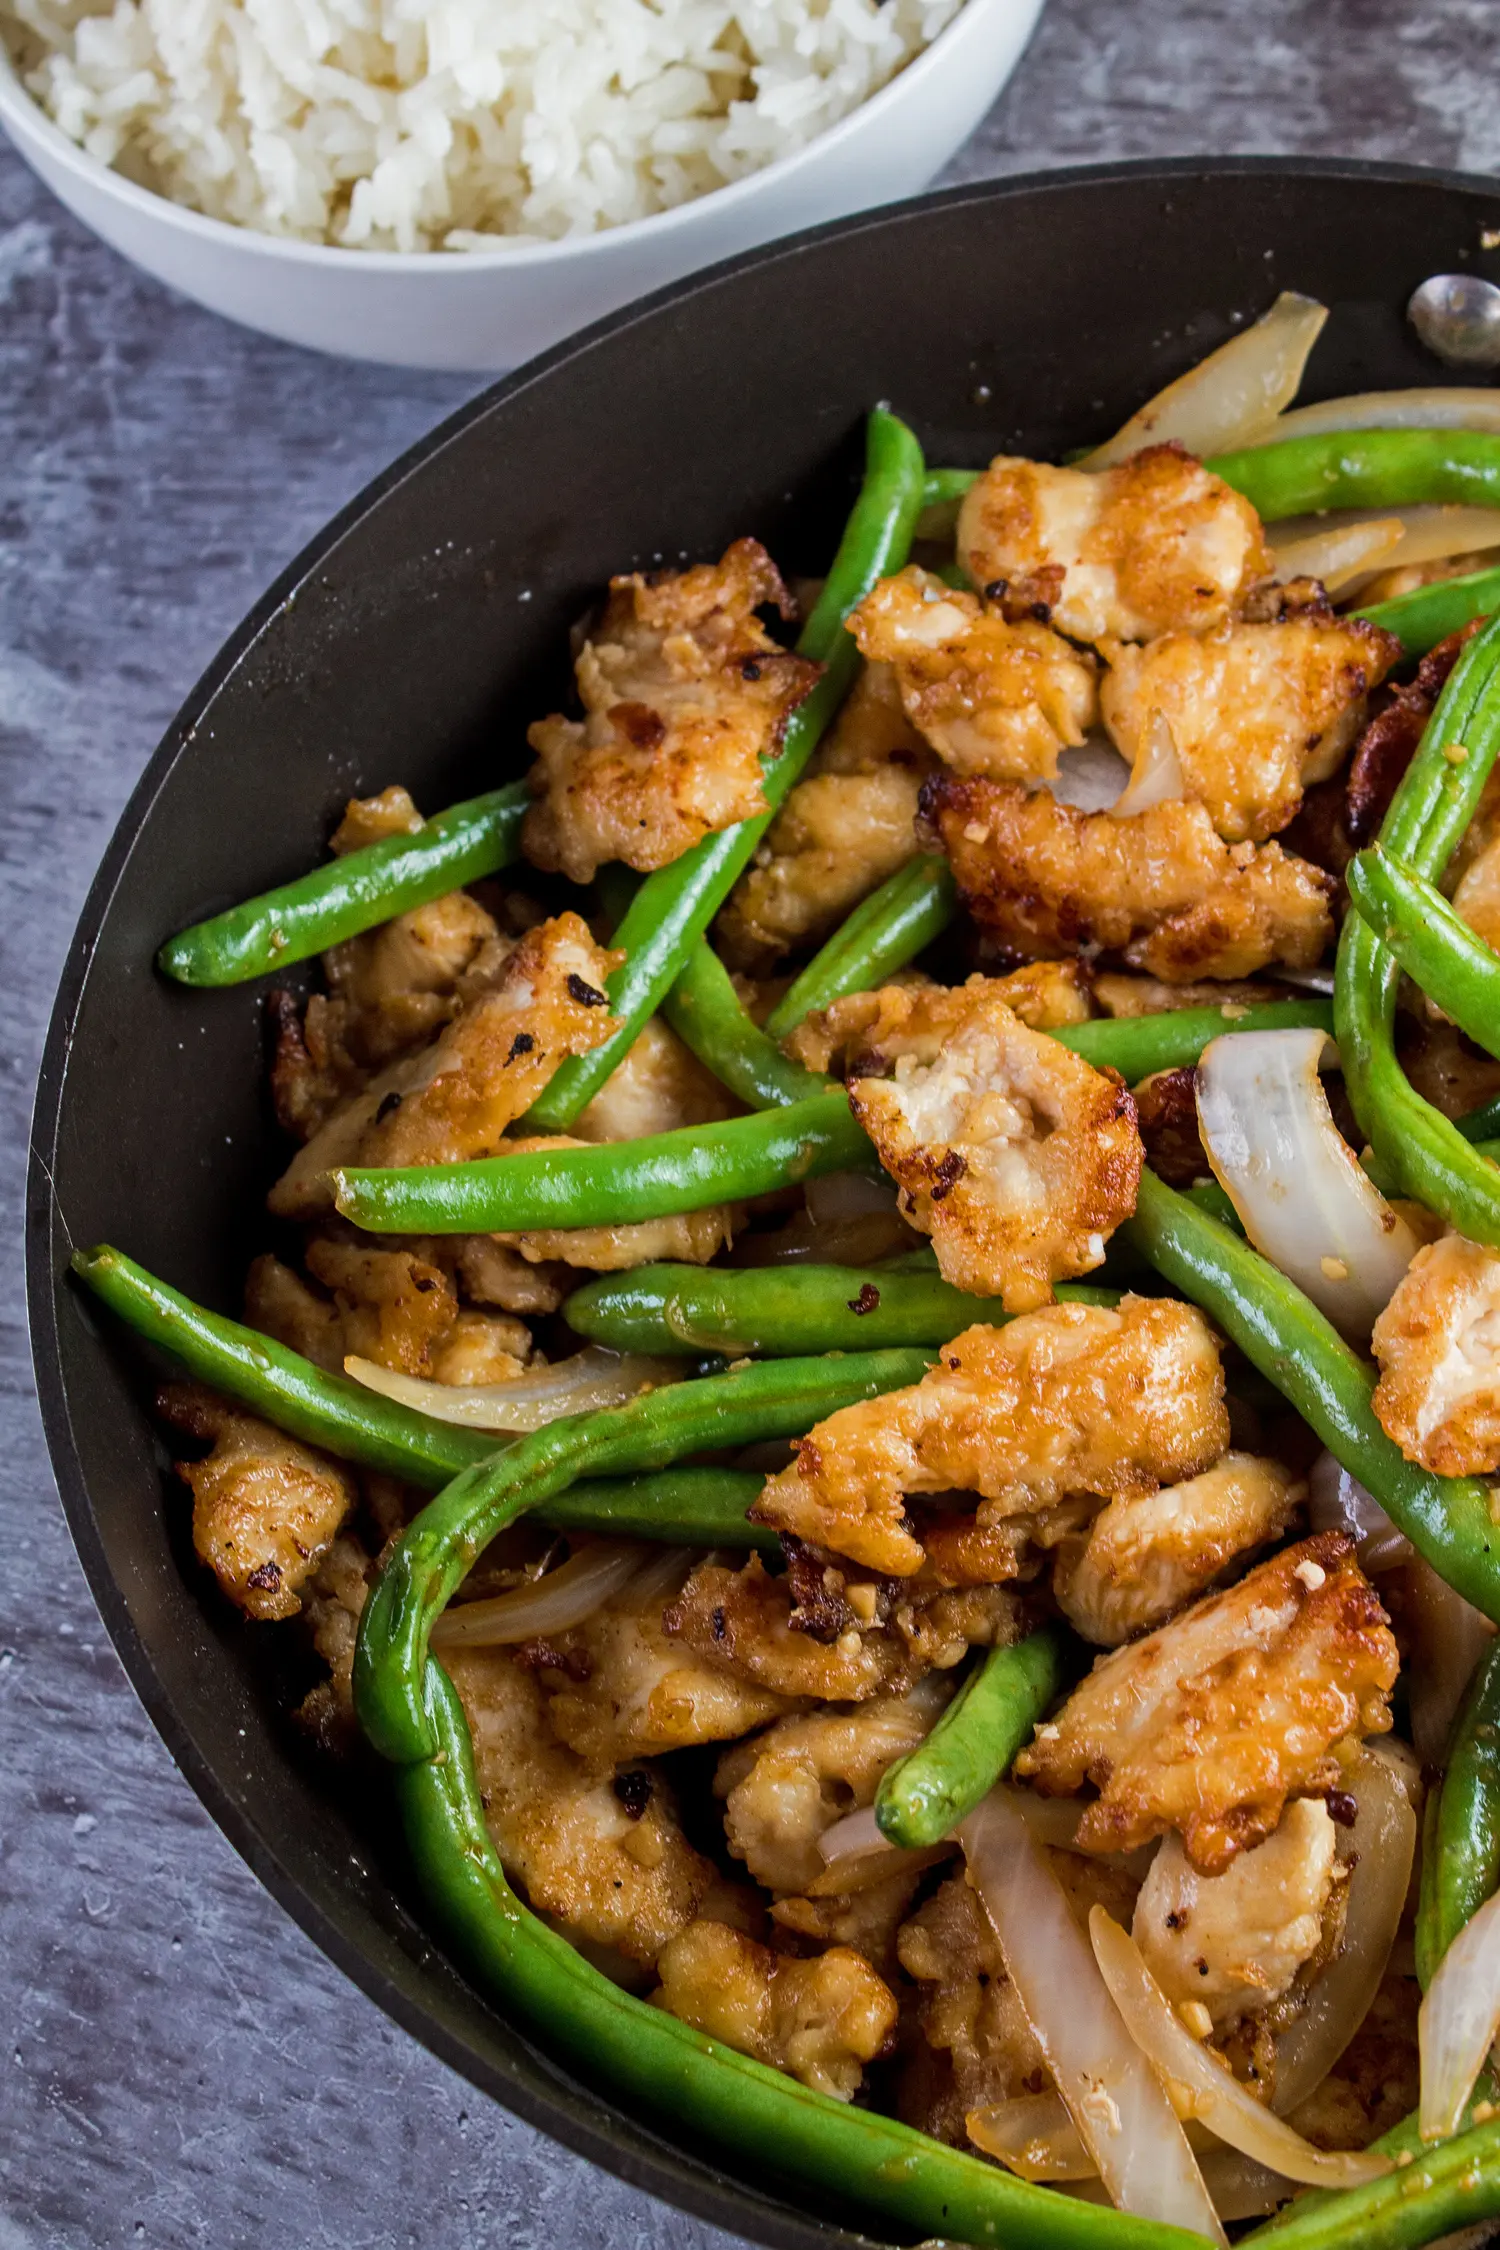 Tall vertical overhead image of the panda express string bean chicken with green beans, chunks of white onion and chicken breast pieces in a frying pan on grey background.